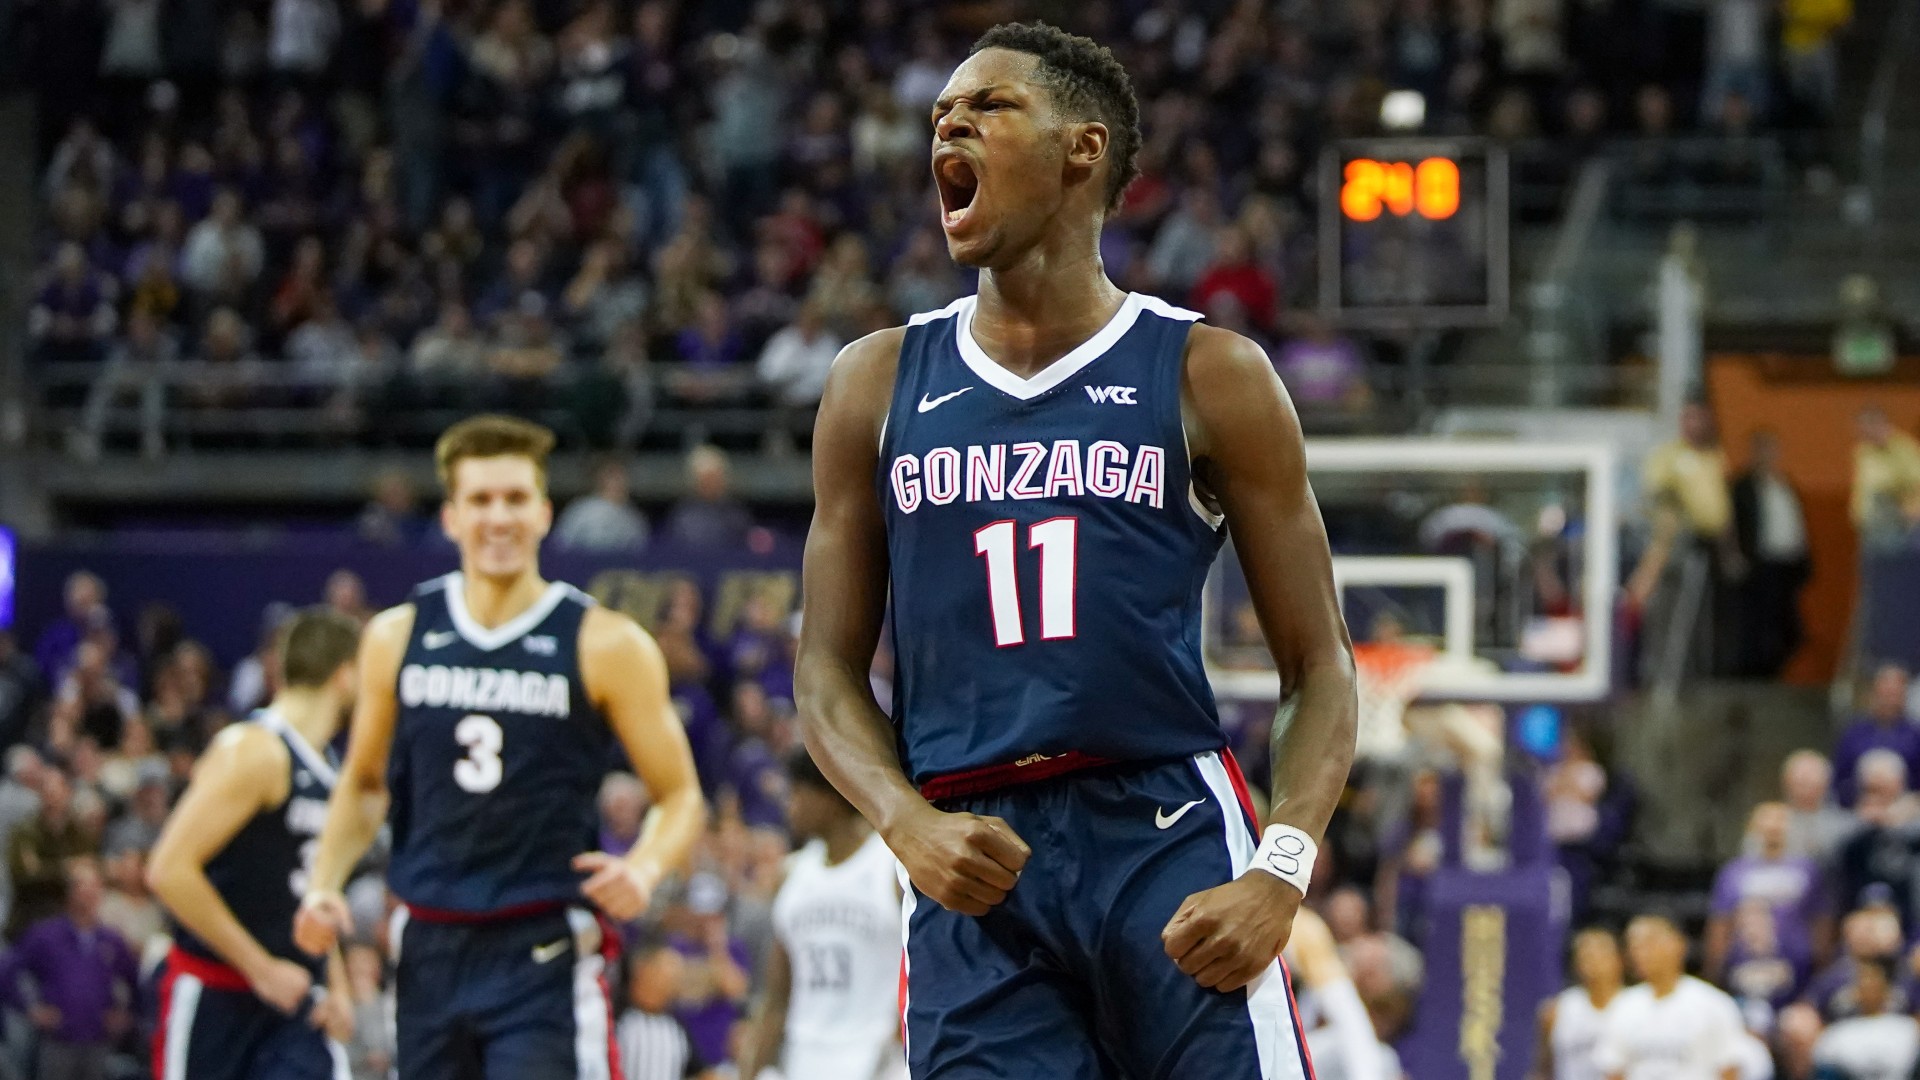 College Basketball Odds & Picks for West Virginia vs. Gonzaga: Wednesday’s Live Betting Value on Bulldogs article feature image